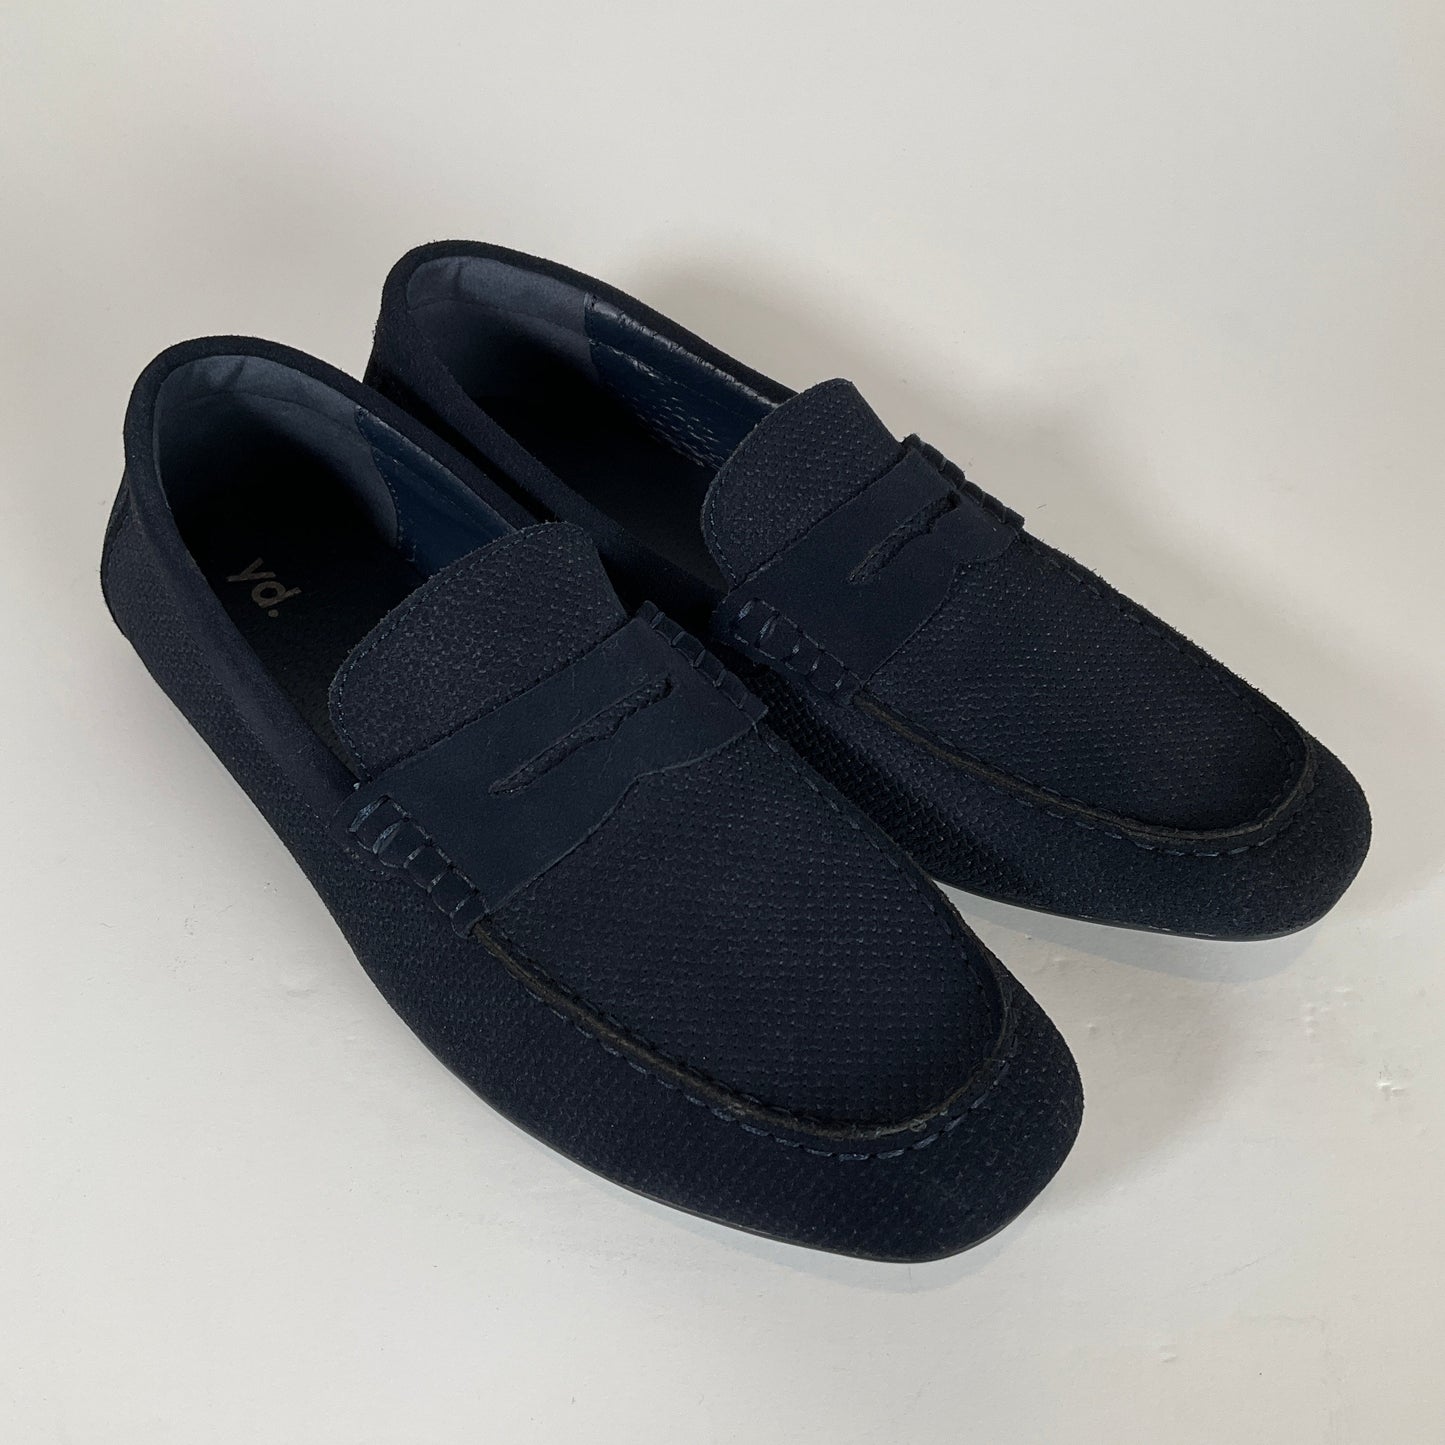 Yd. - Navy Loafers Size 11 Shoes